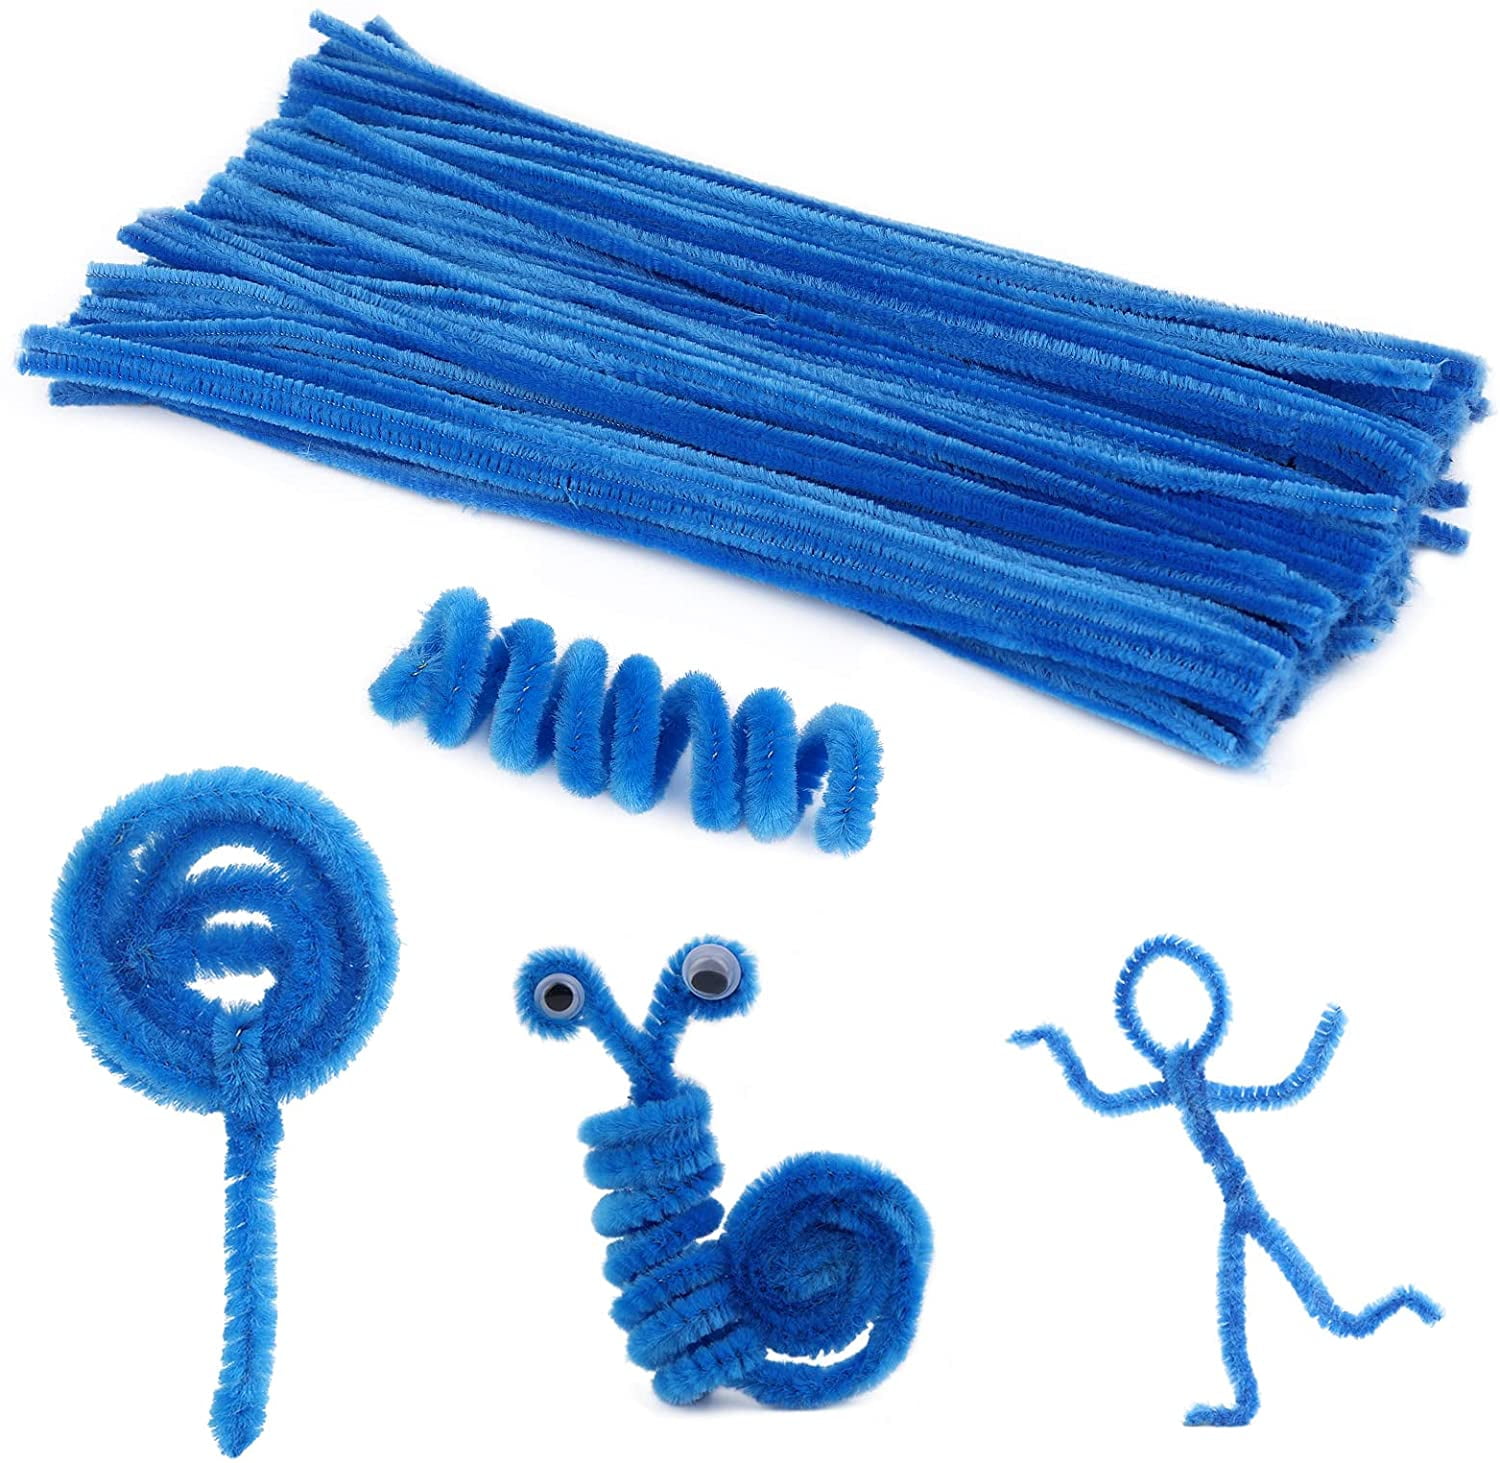 Blue Squid Pipe Cleaners Craft Chenille Stems - Chenille Cleaners, Pipe Cleaners, DIY Art & Craft Projects, Kids Fuzzy Sticks Crafts, Extra Long